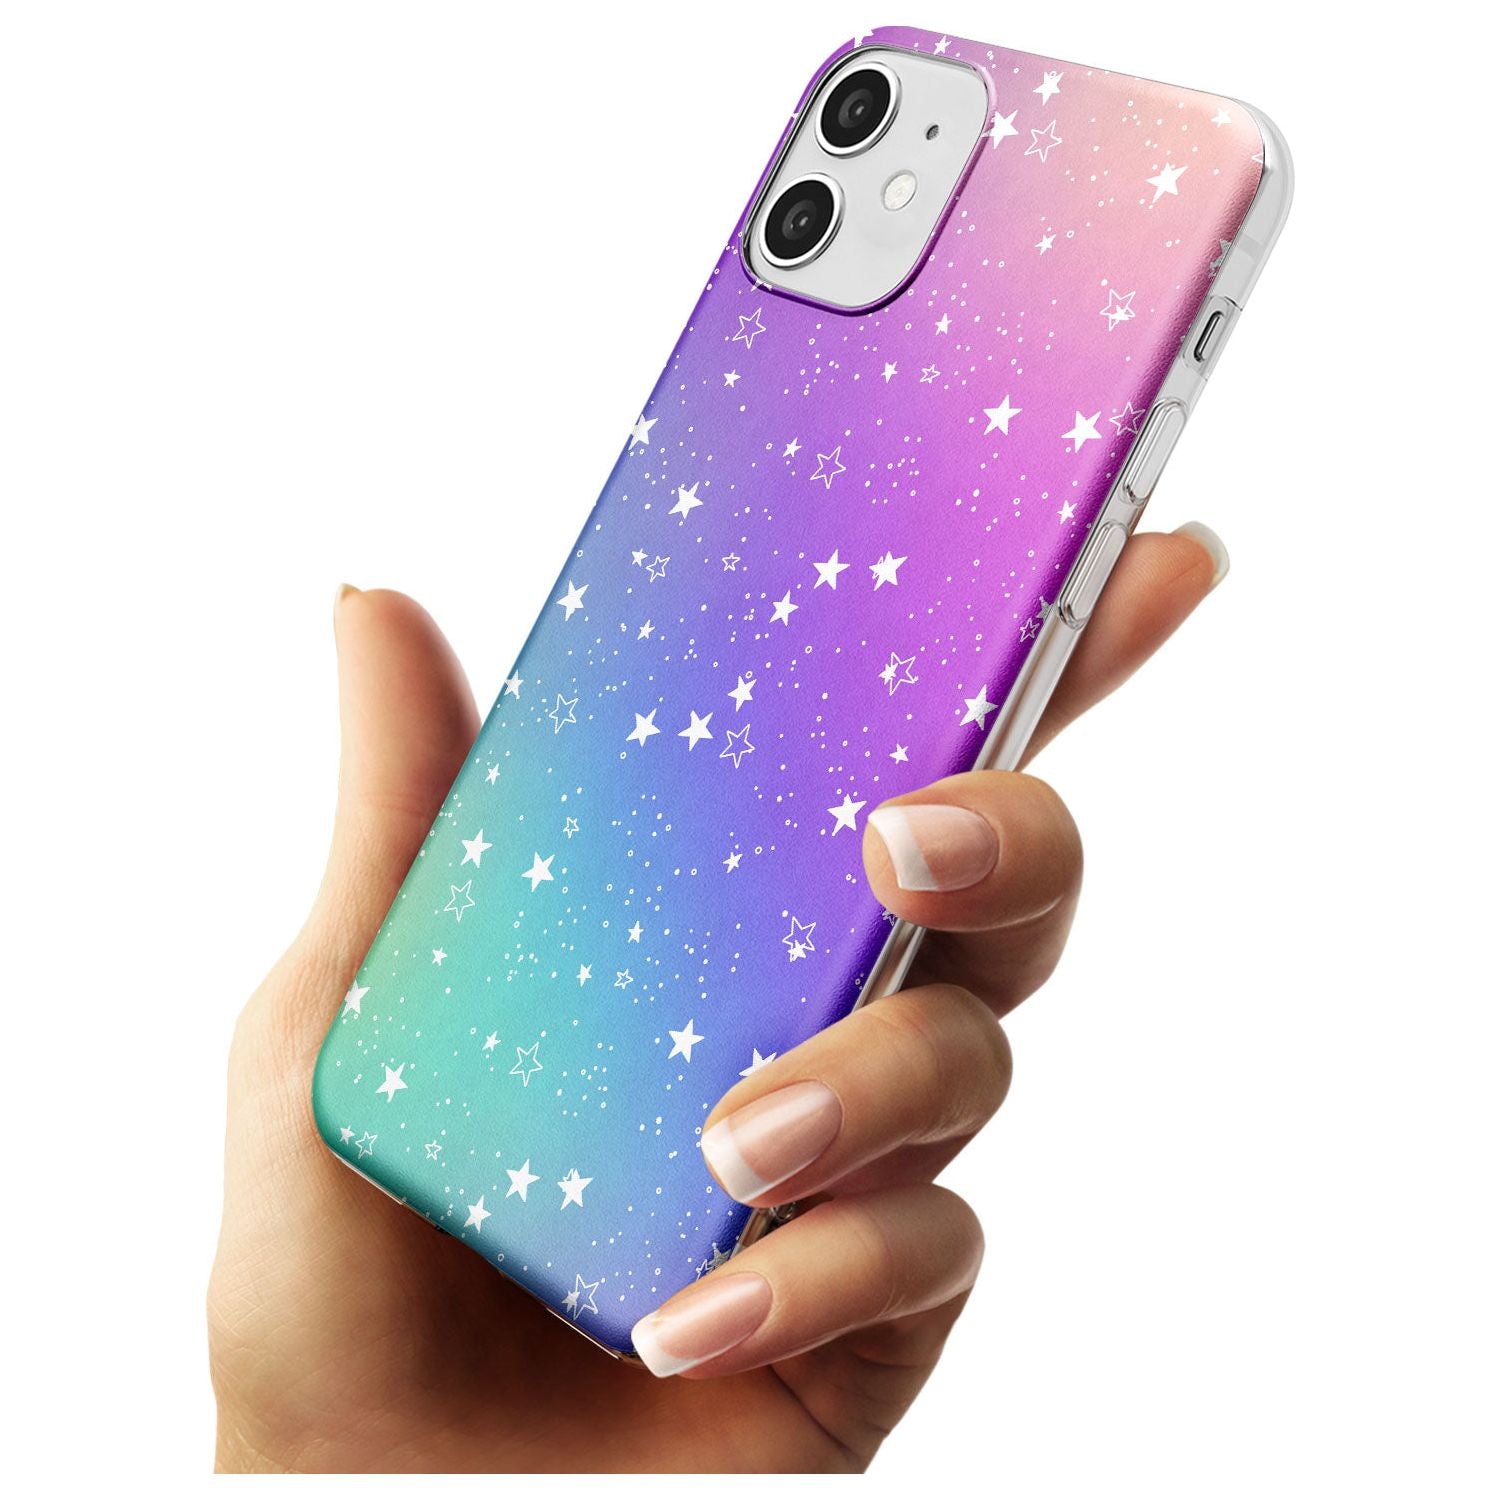 White Stars on Pastels Black Impact Phone Case for iPhone 11